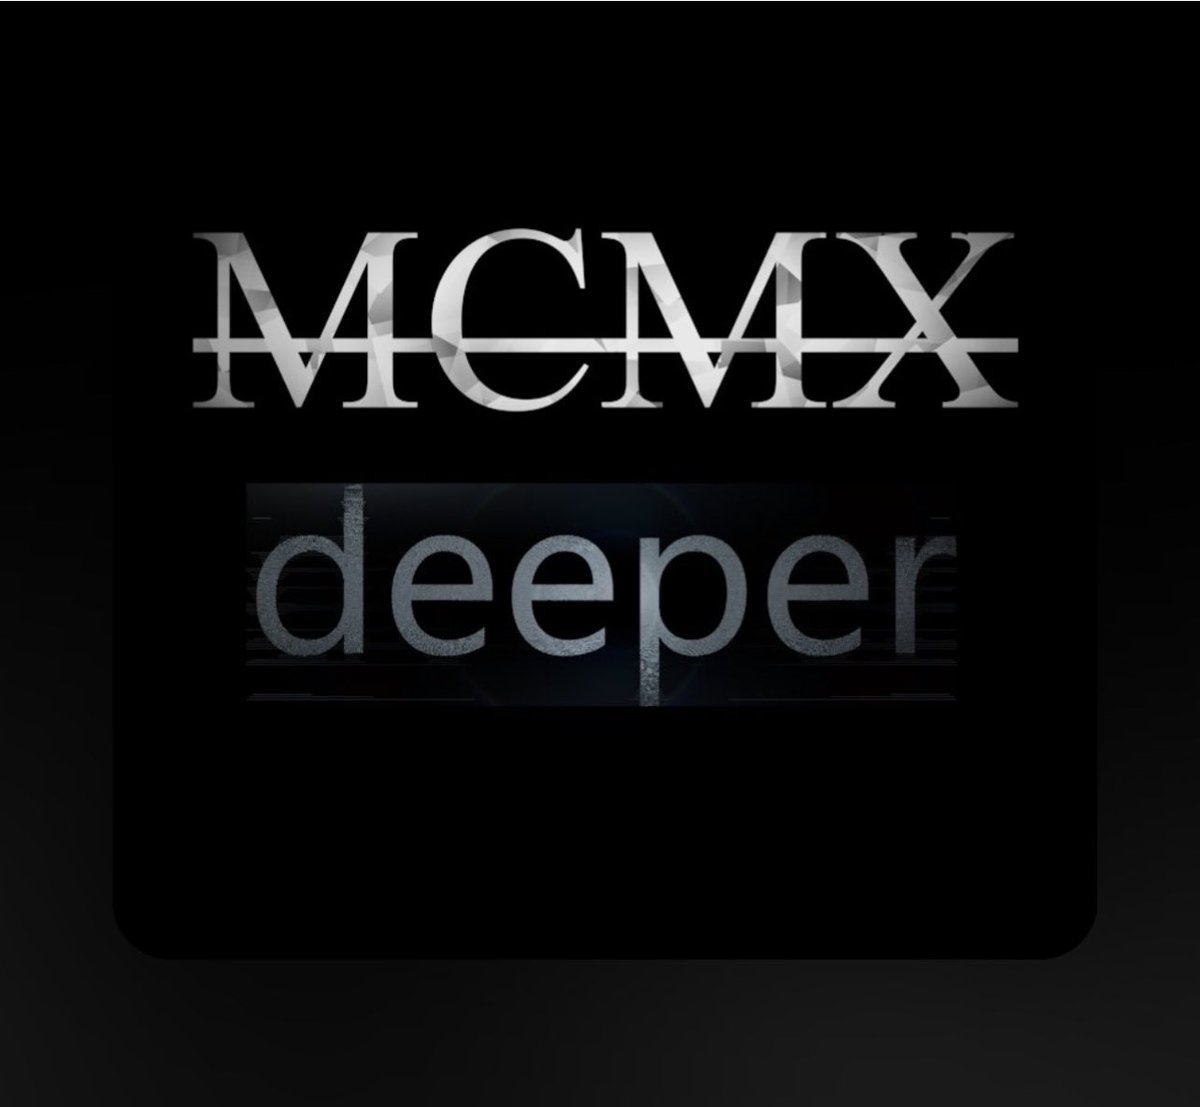 Deeper - darker - different MCMX Video out today - youtube.com/watch?v=_KhxKO… track releases Friday 3 May #NewMusicFriday #darkelectro #cinematic